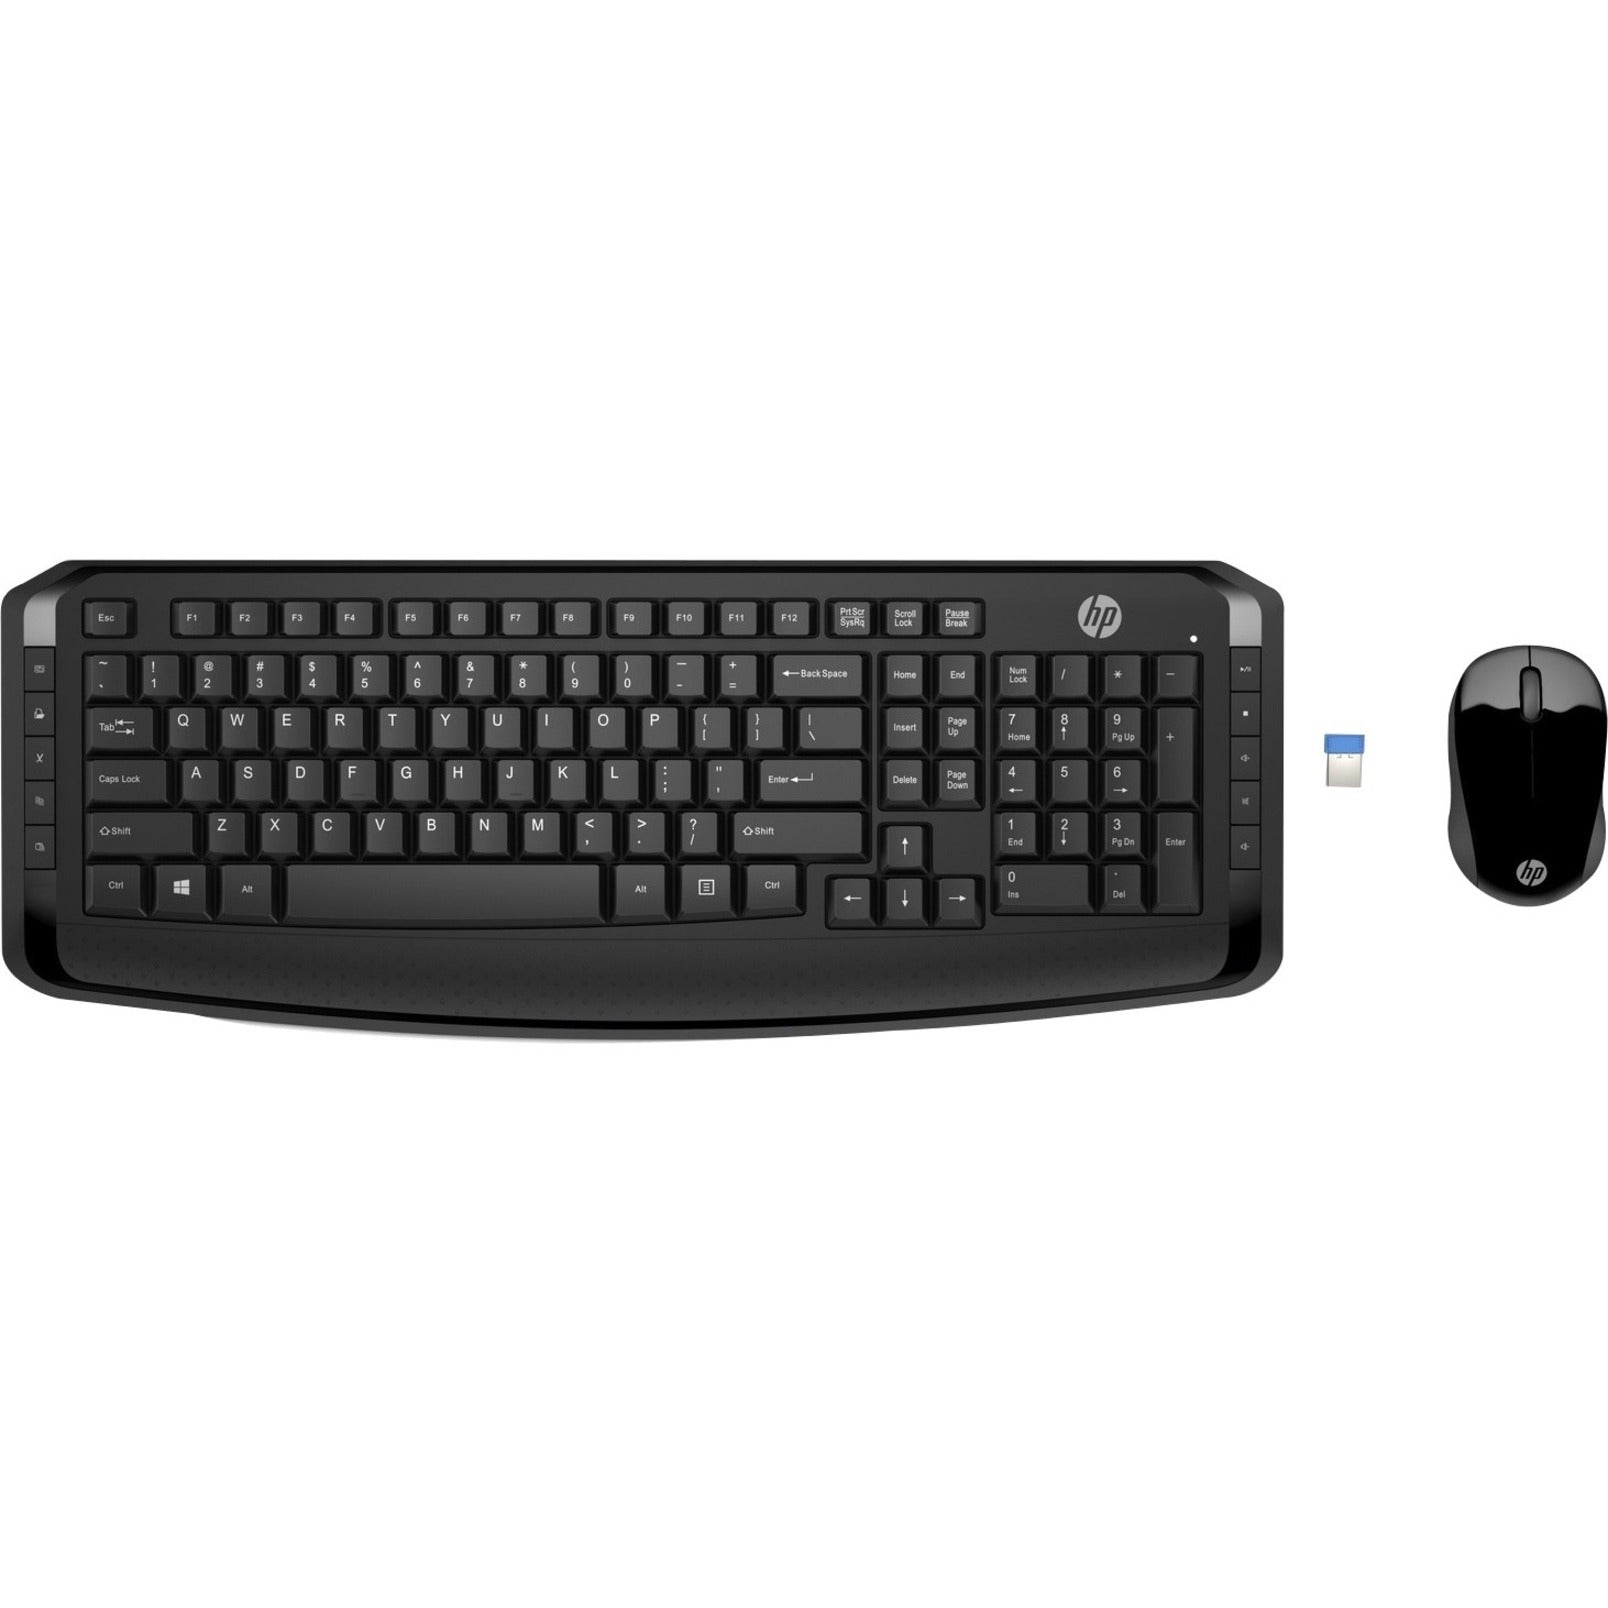 HP 3ML04AA#ABL Wireless Keyboard And Mouse 300, Full-size Keyboard, 2.4 GHz Wireless Technology